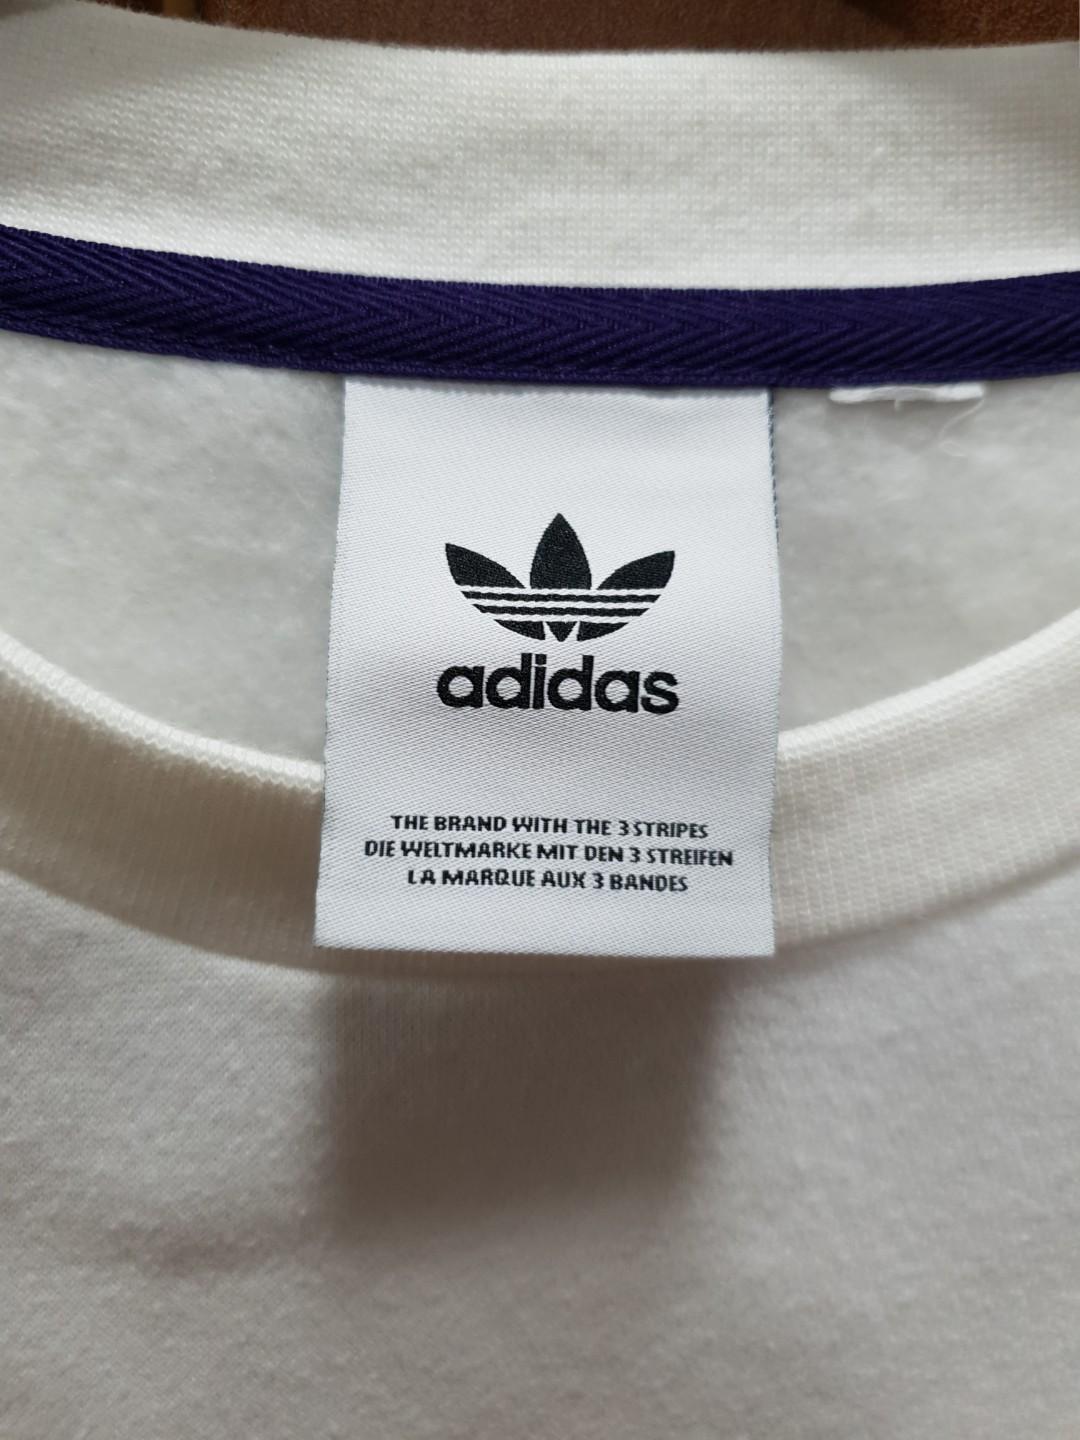 Adidas Pullover Men S Fashion Clothes Tops On Carousell